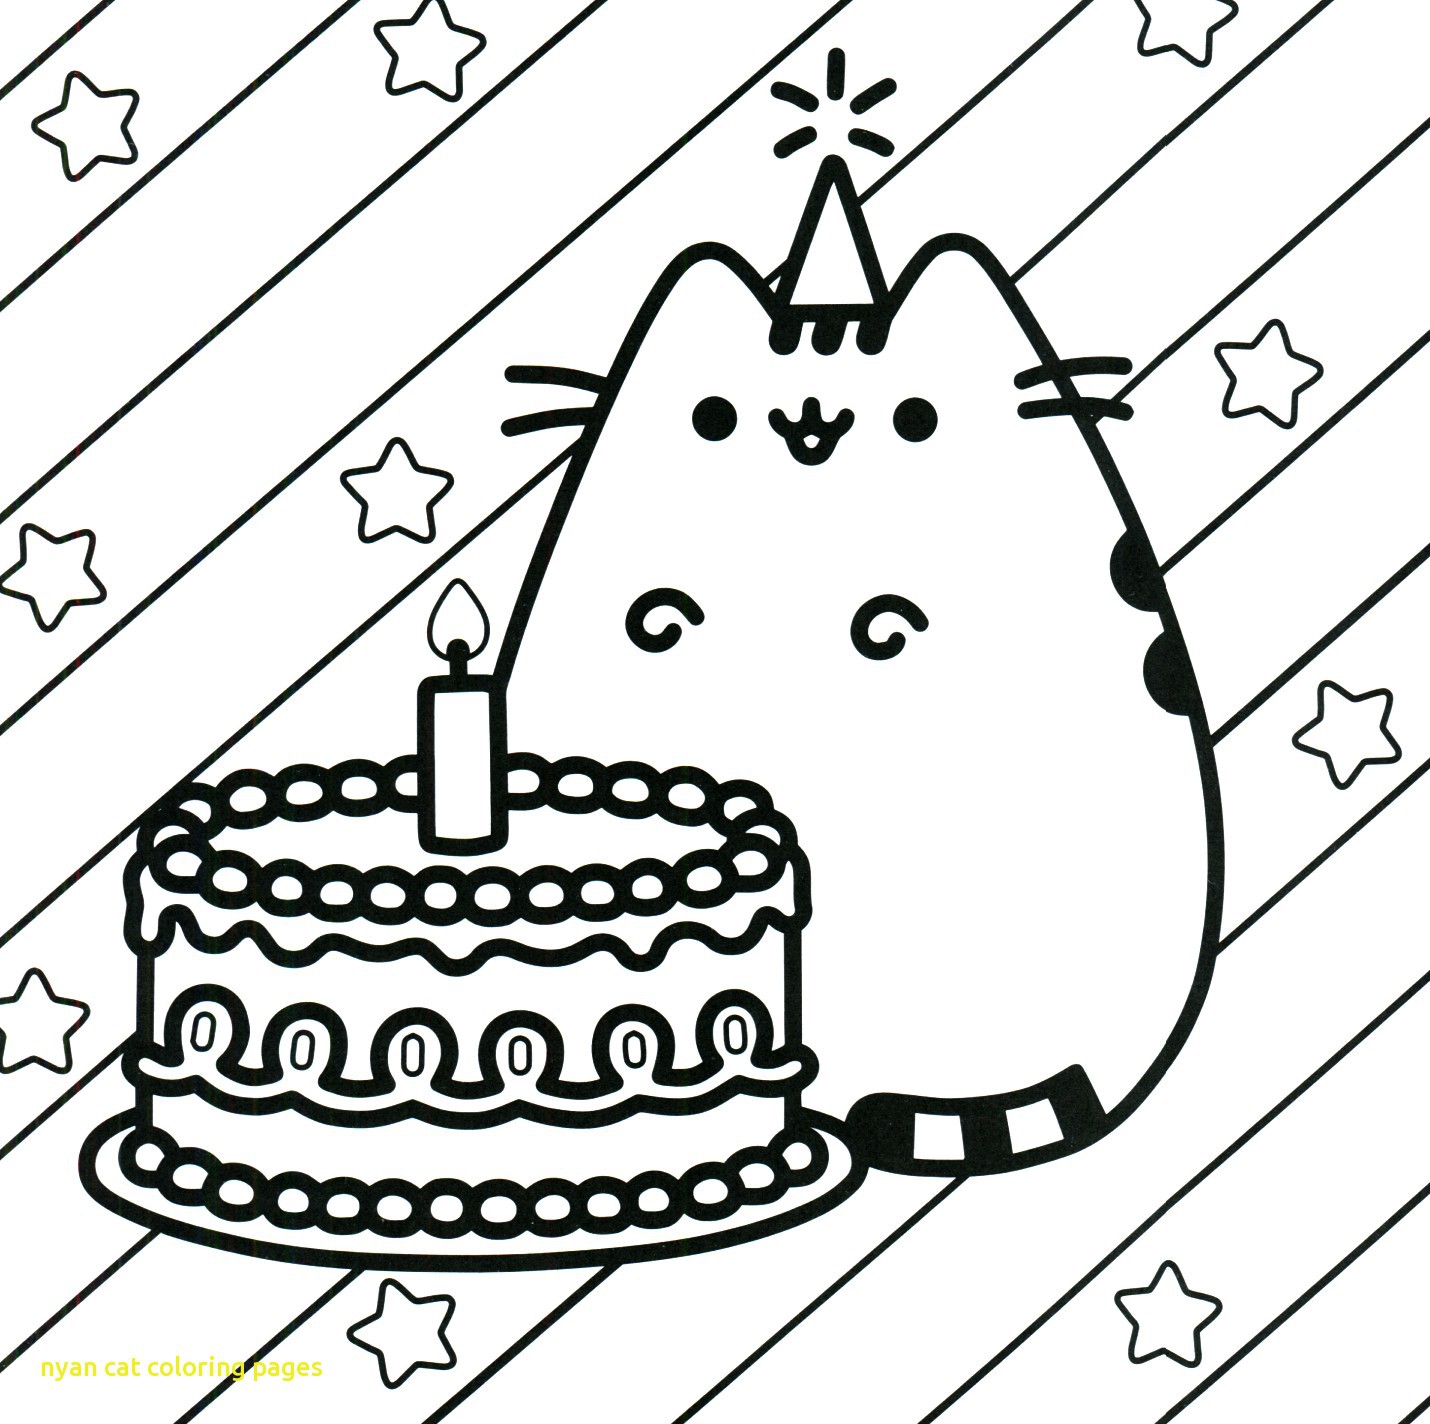 Nyan Cat Coloring Pages with Nyan Cat Coloring Pages Rosendorf